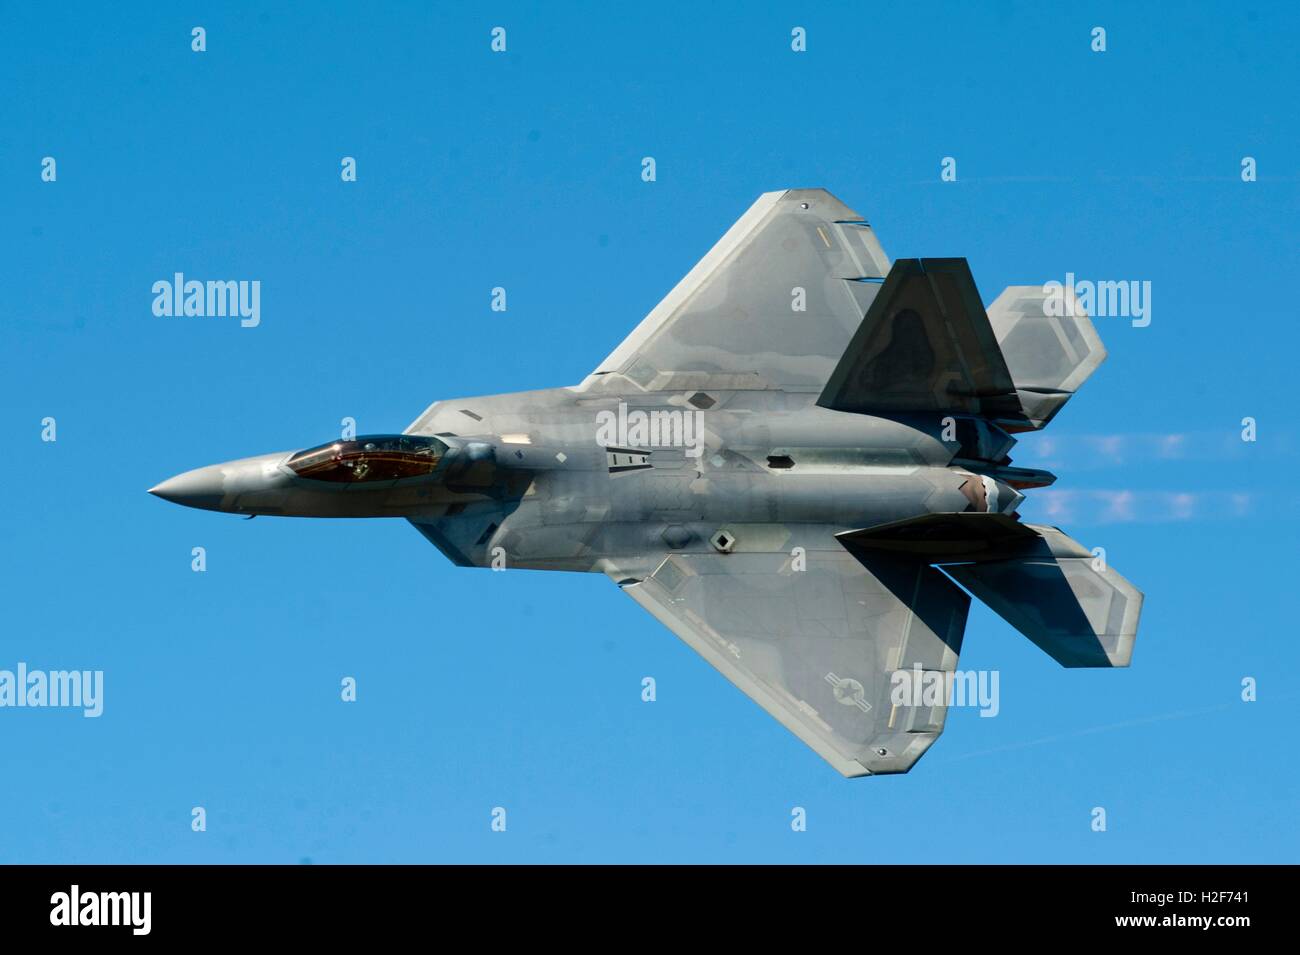 A U.S. Air Force F-22 Raptor stealth fighter aircraft performs aerial maneuvers during a demonstration for the AirPower over Hampton Roads Open House at the Langley Air Force Base April 24, 2016 in Hampton, Virginia. Stock Photo